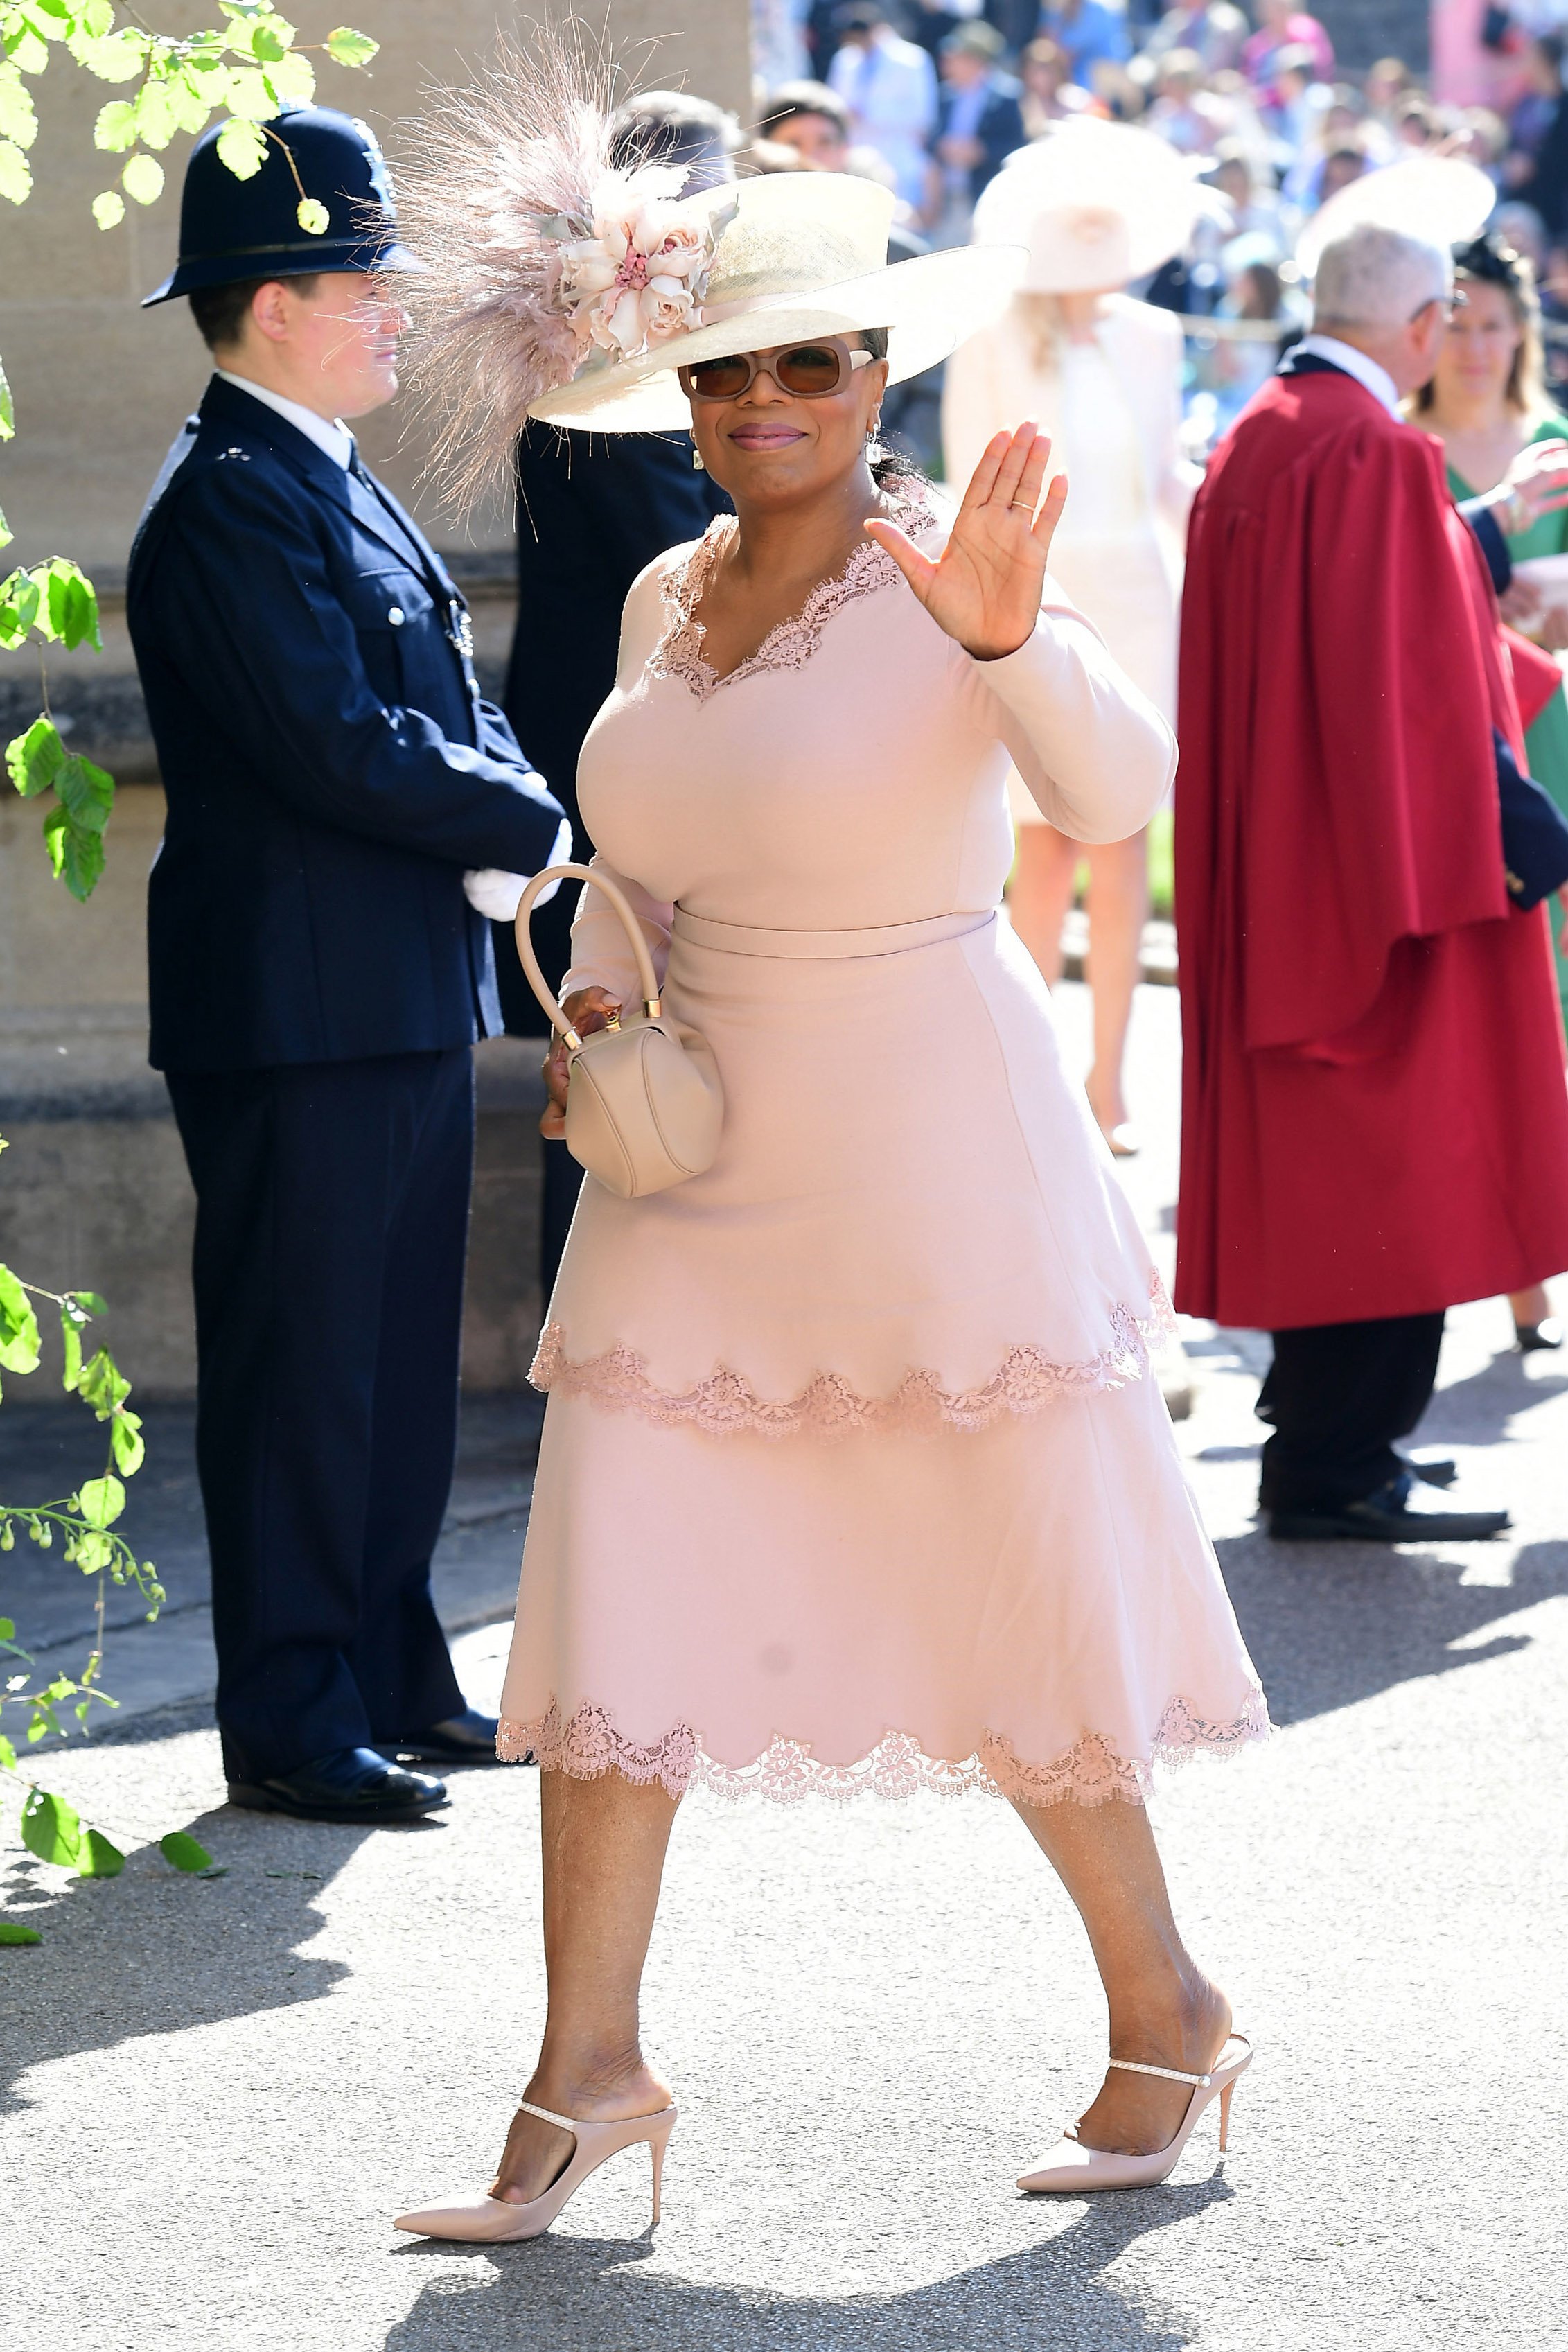  Oprah Winfrey arrives at St George's Chapel at Windsor Castle before the wedding of Prince Harry to Meghan Markle on May 19, 2018| Photo: Getty Images